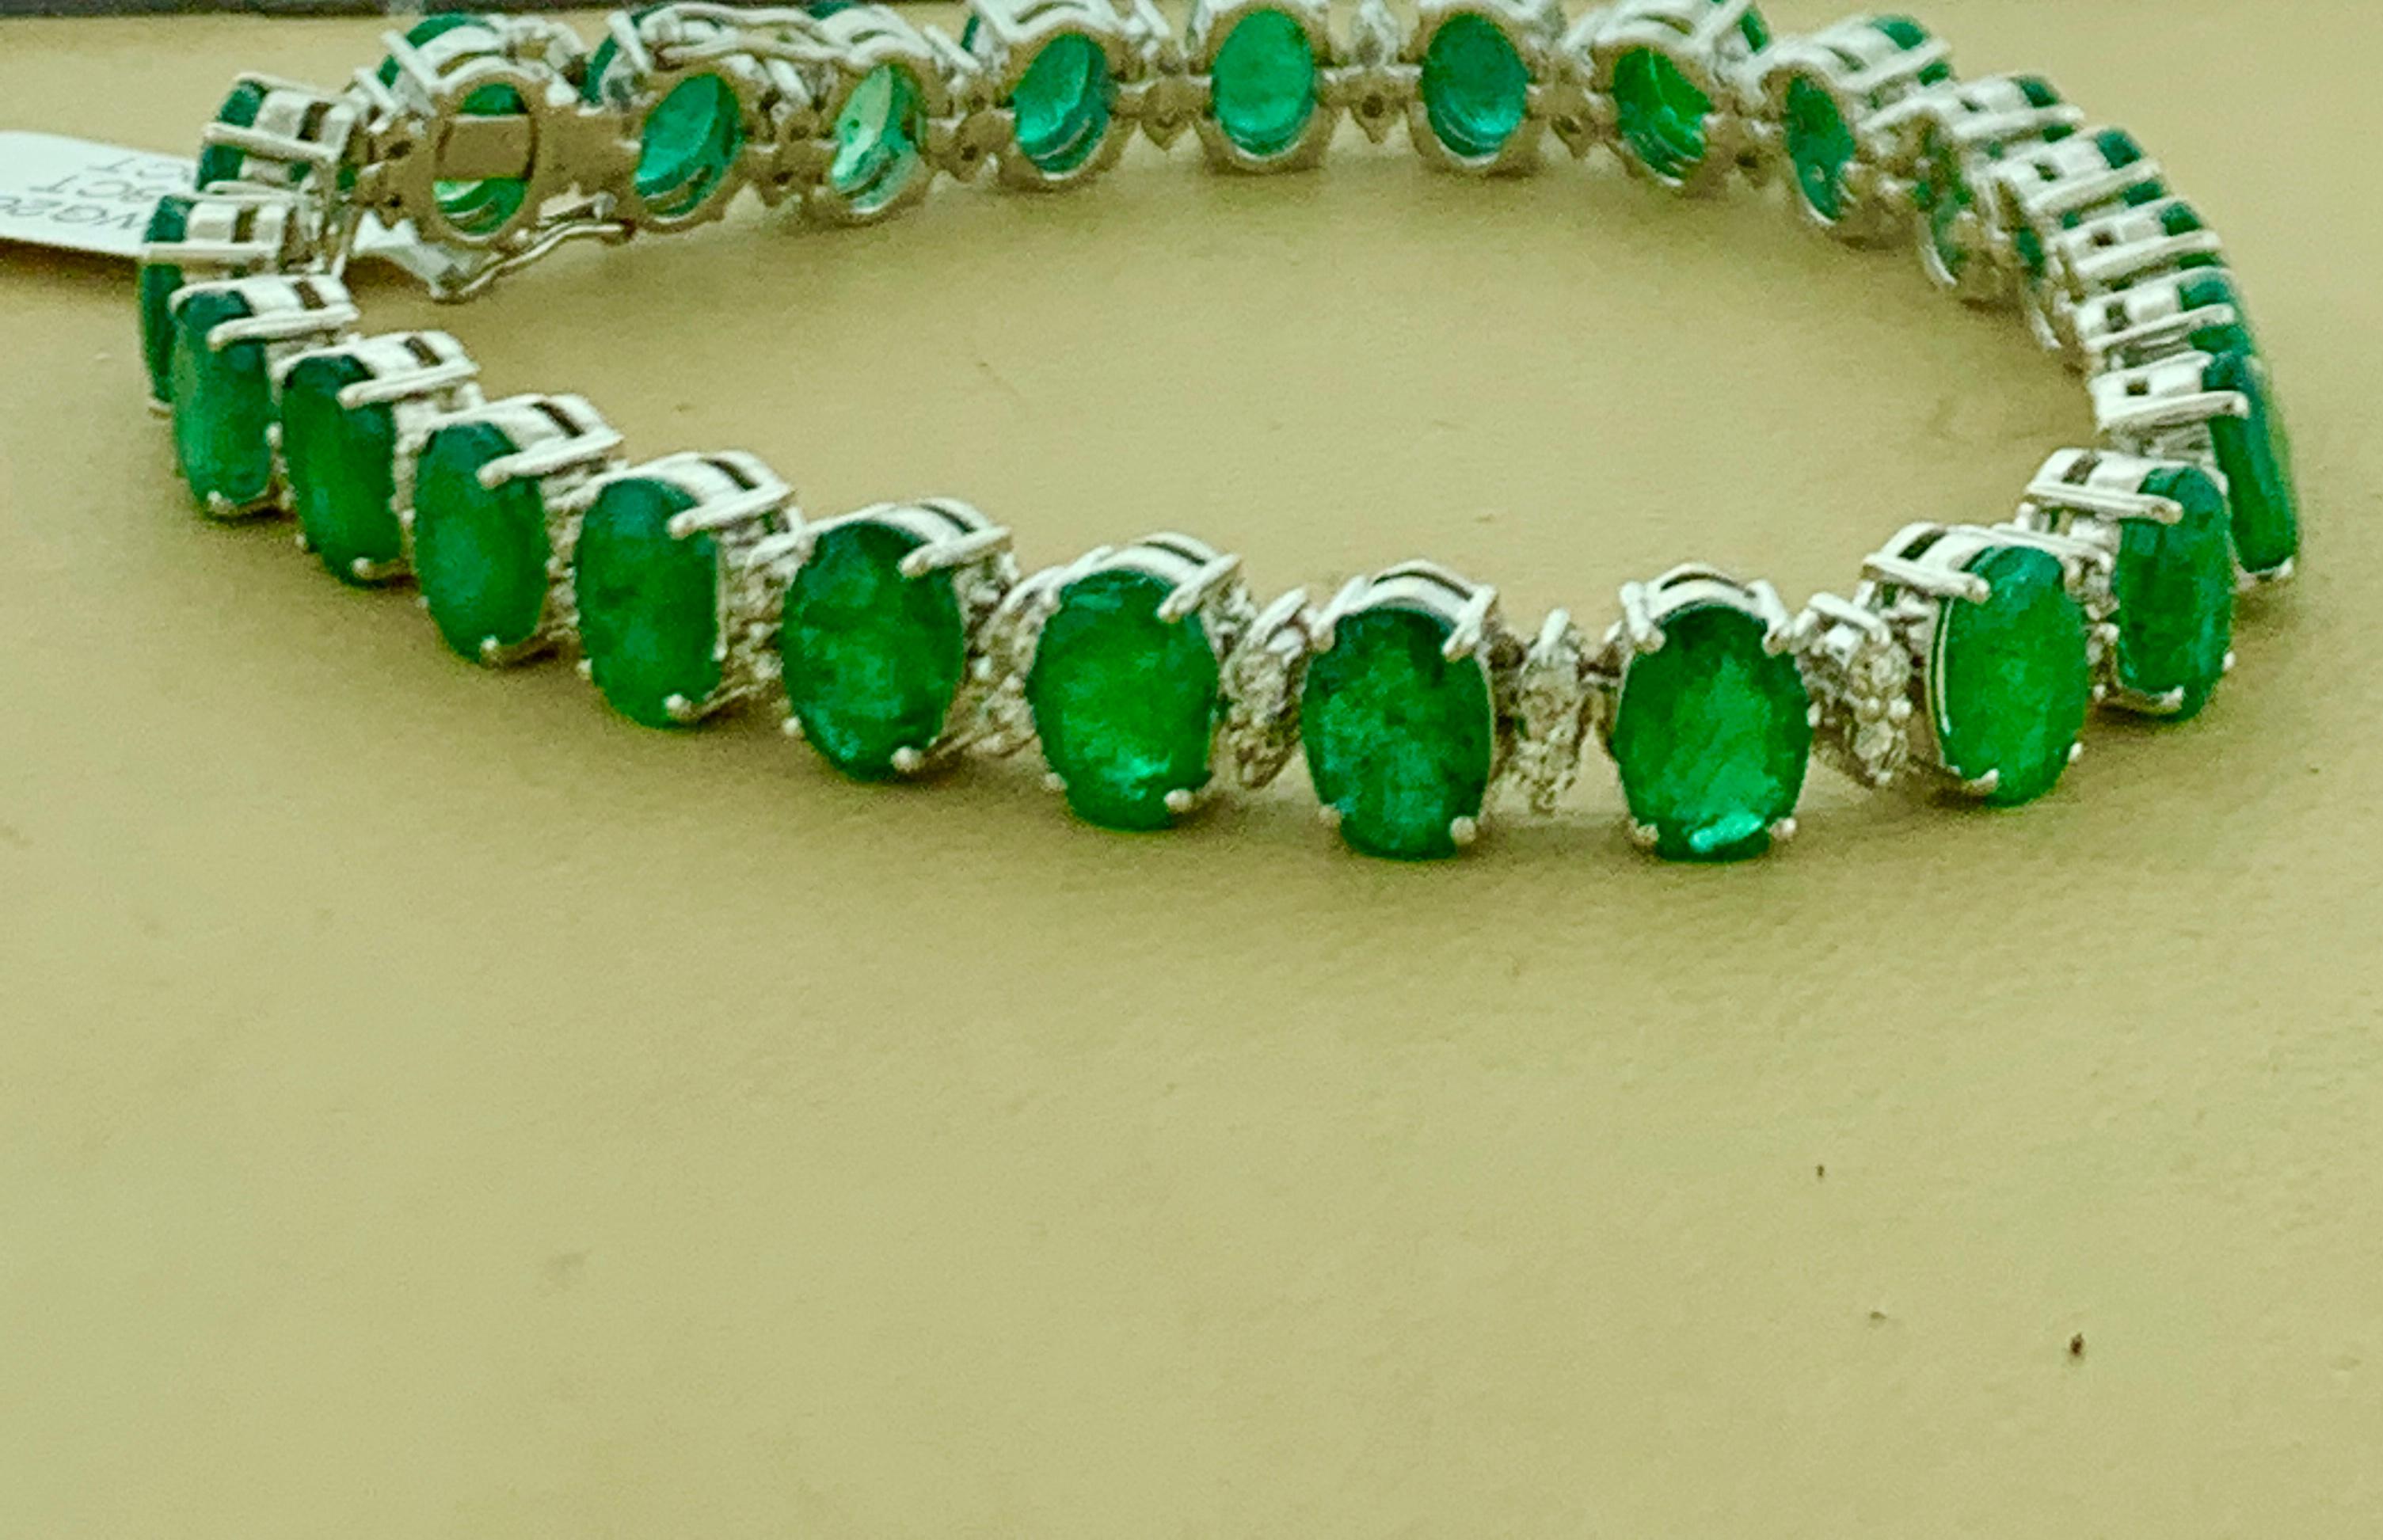  This exceptionally affordable Tennis  bracelet has  25 stones of oval  Emeralds  . Each Emerald is spaced by two diamonds .Total weight of Emerald is 20 carat. Total number of diamonds are 50 and diamond weighs 1.8 ct.
The bracelet is expertly